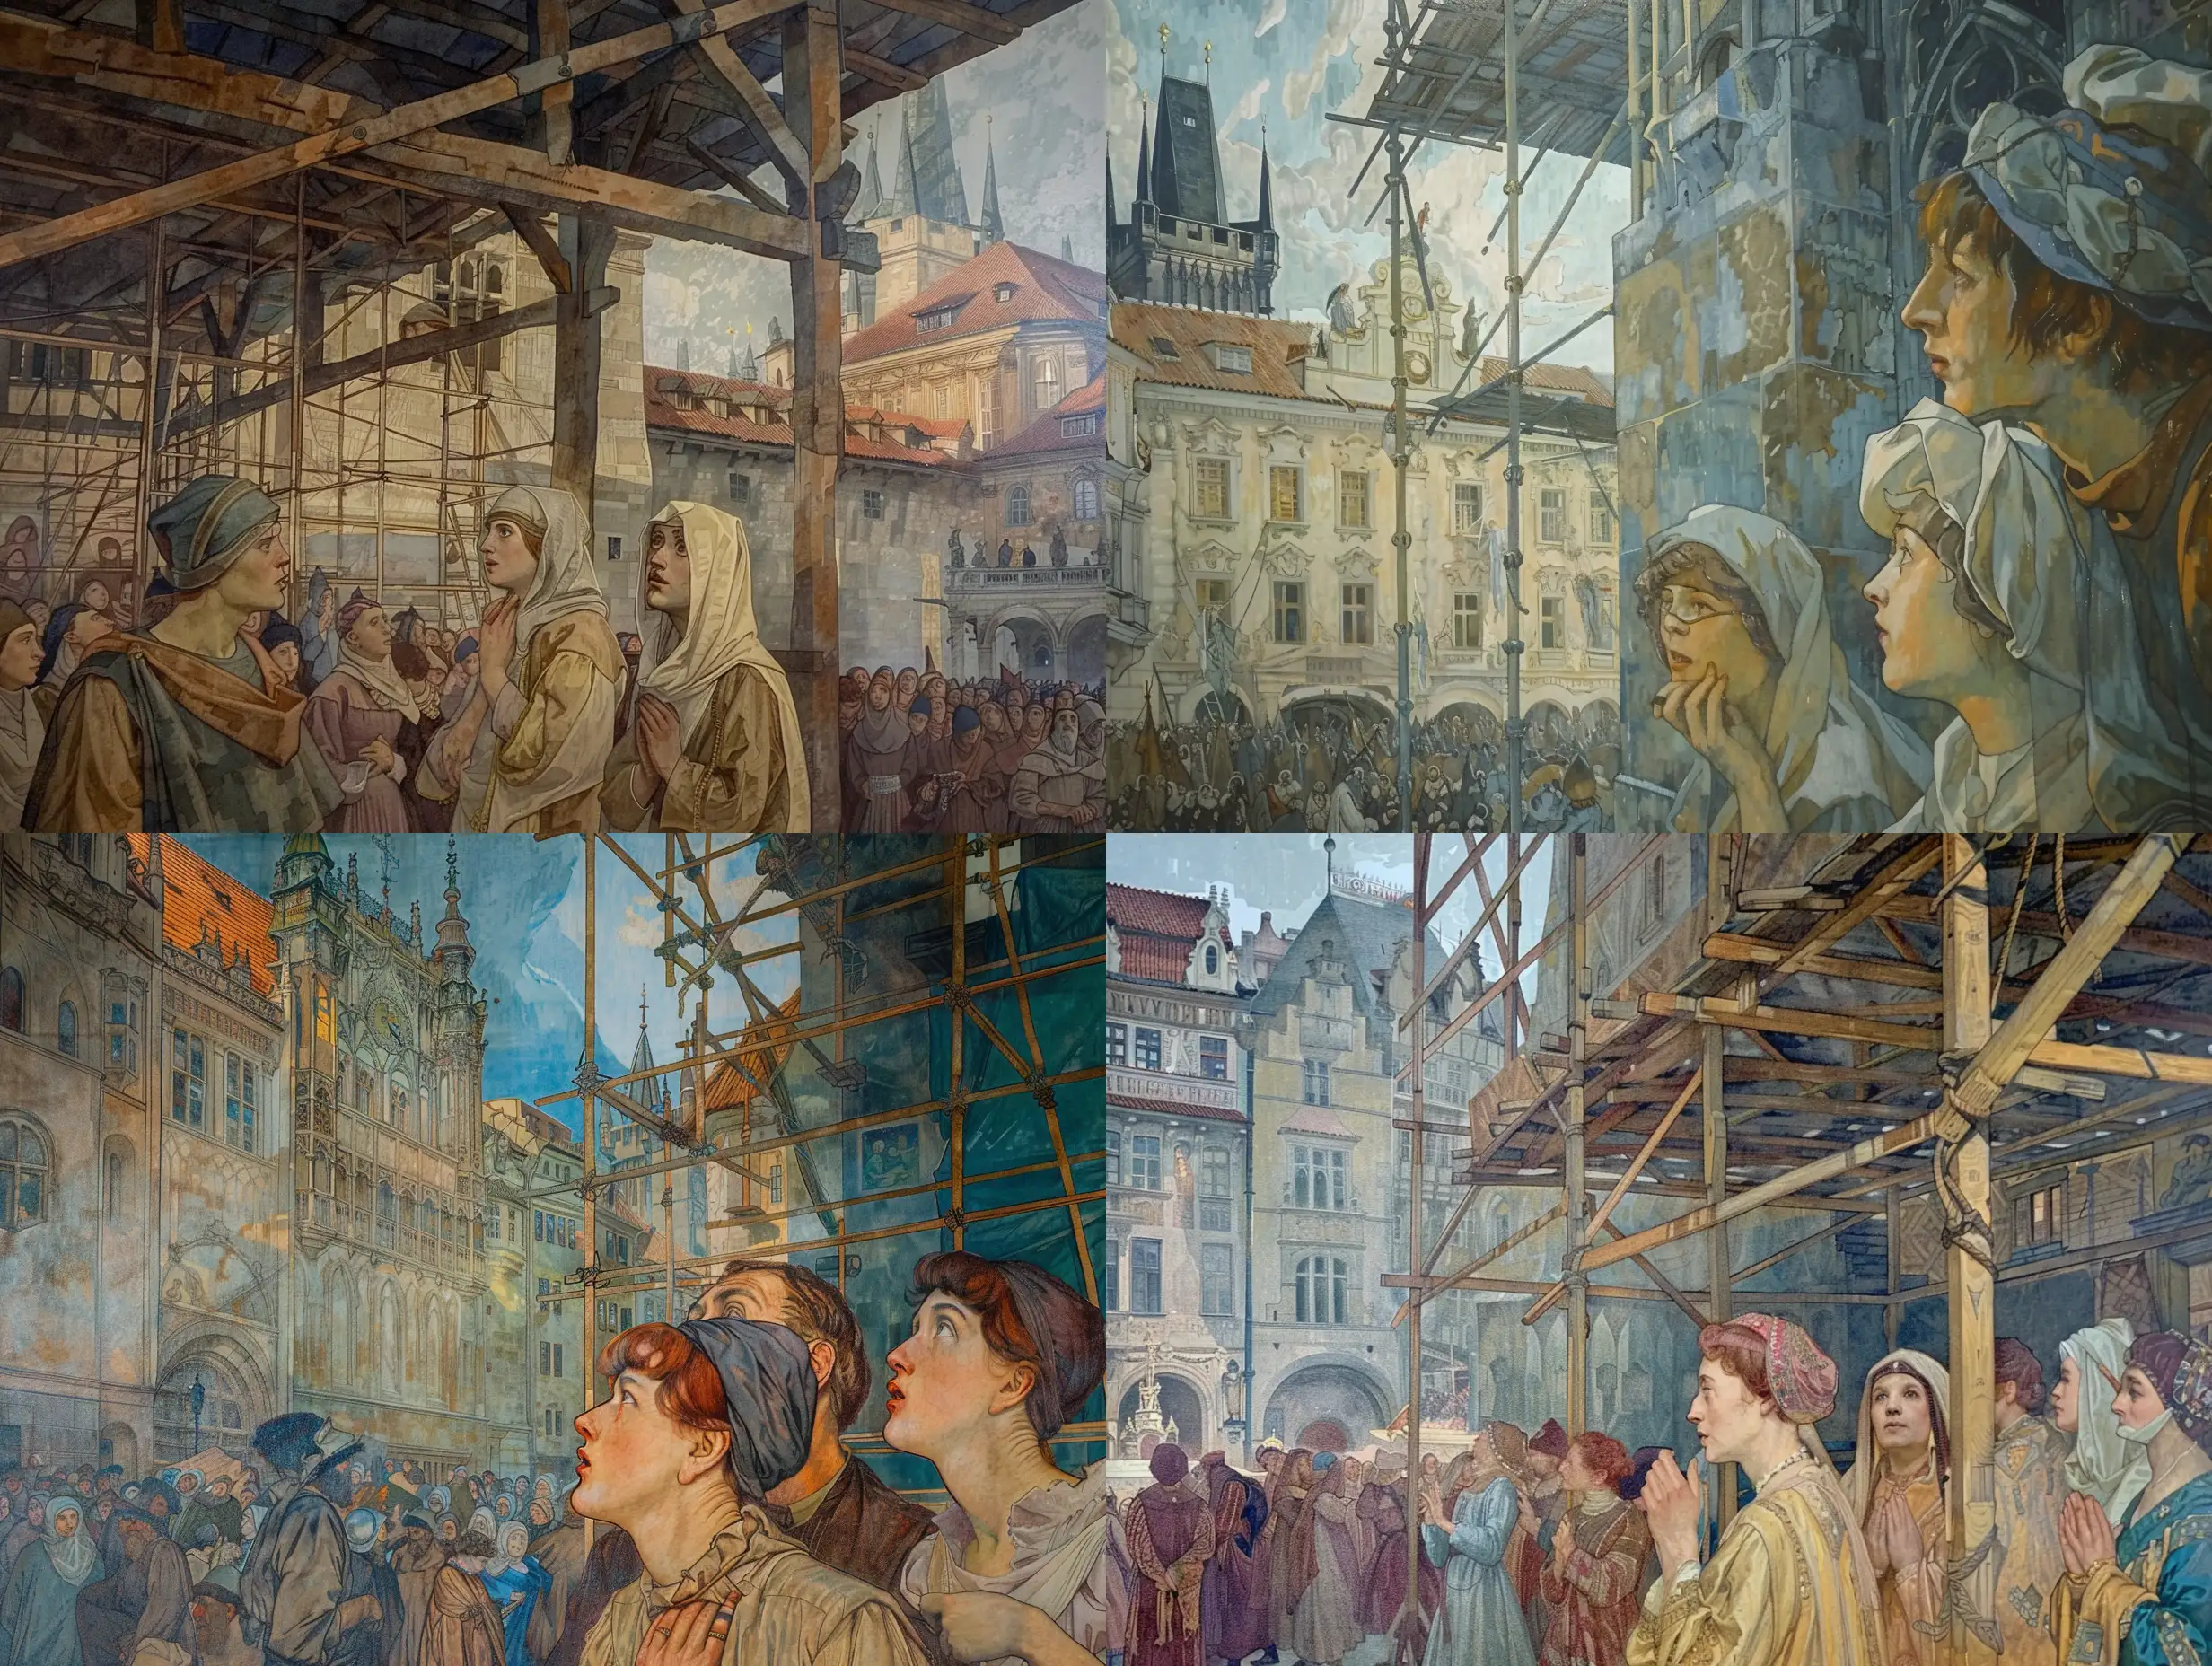 Painting in style of The Slavs Epic of Alfons Mucha. 14th century. The image shows the rest of the building in the background and a crowd watching. On the left is part of the Gothic buildings of Prague - Konviktská Street. In the foreground, under the scaffolding of the new shelter, Jan Milíč speaks to the women who, under the influence of his words, are putting away their jewellery and doing penance. The symbol of repentance, reformation and doing good is represented by a woman with a blindfold over her mouth.